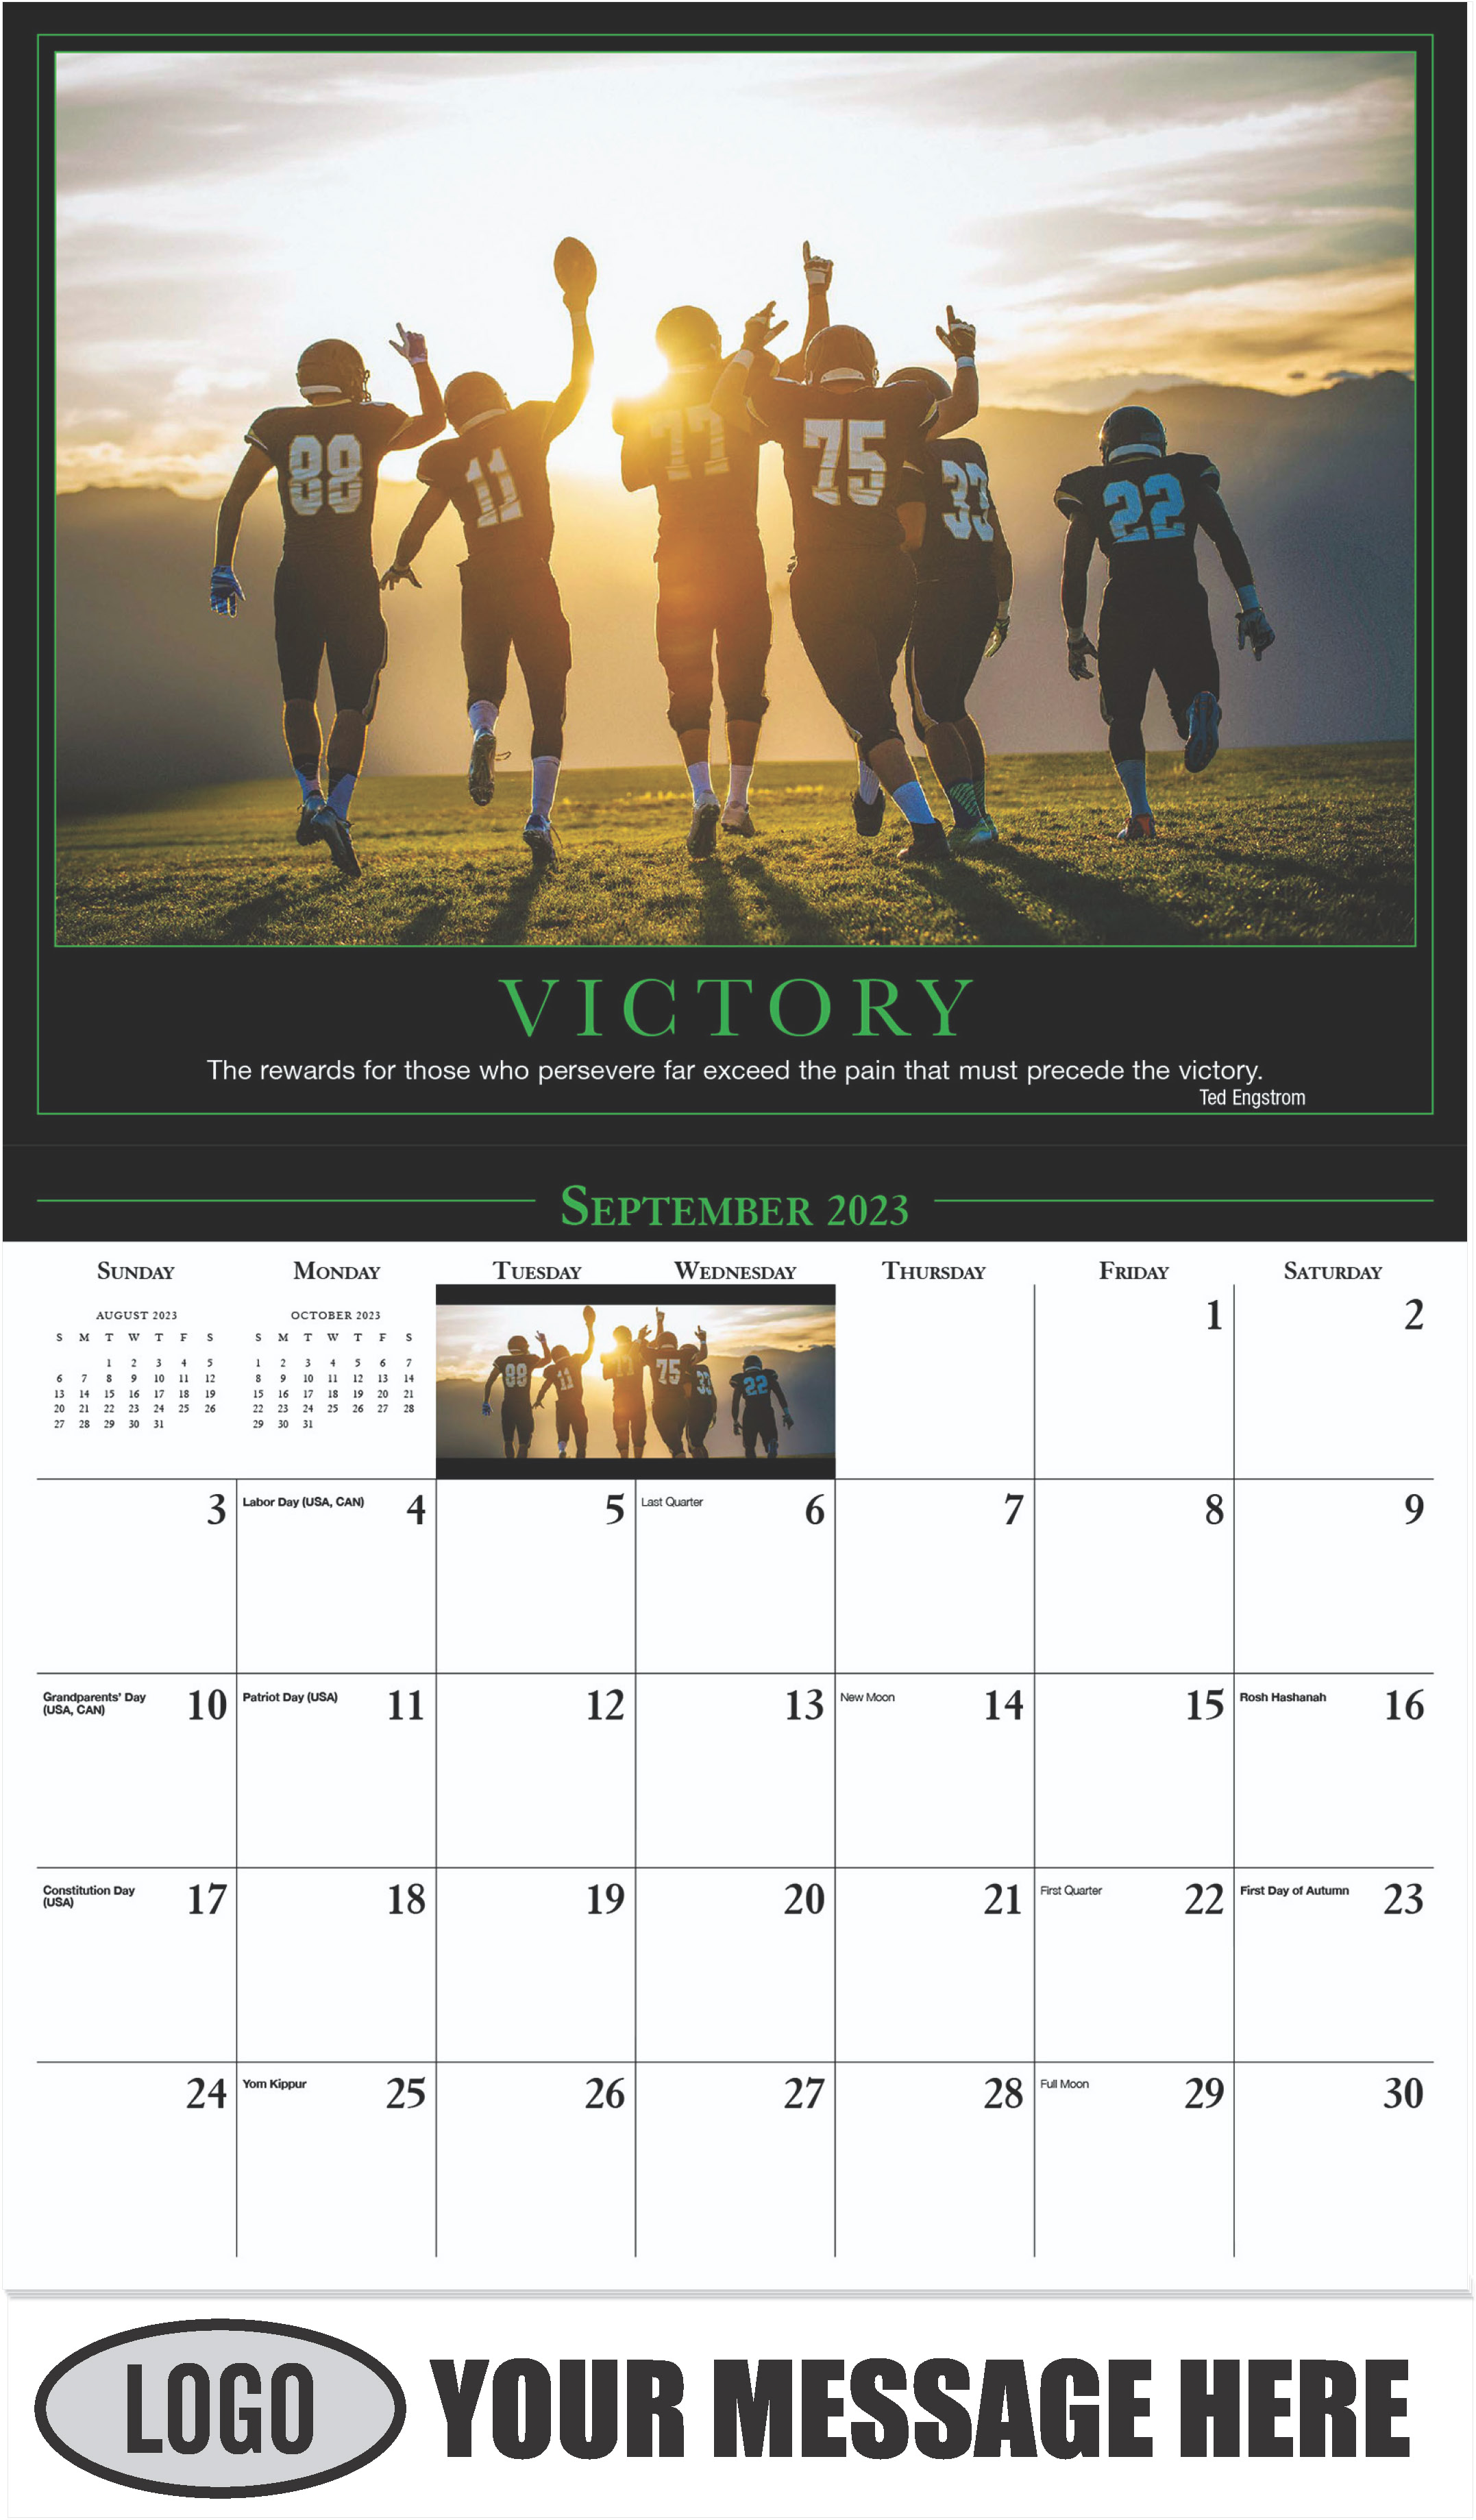 VICTORY ''The rewards for those who persevere far exceed the pain that must precede the victory.'' - Ted Engstrom - September - Motivation 2023 Promotional Calendar